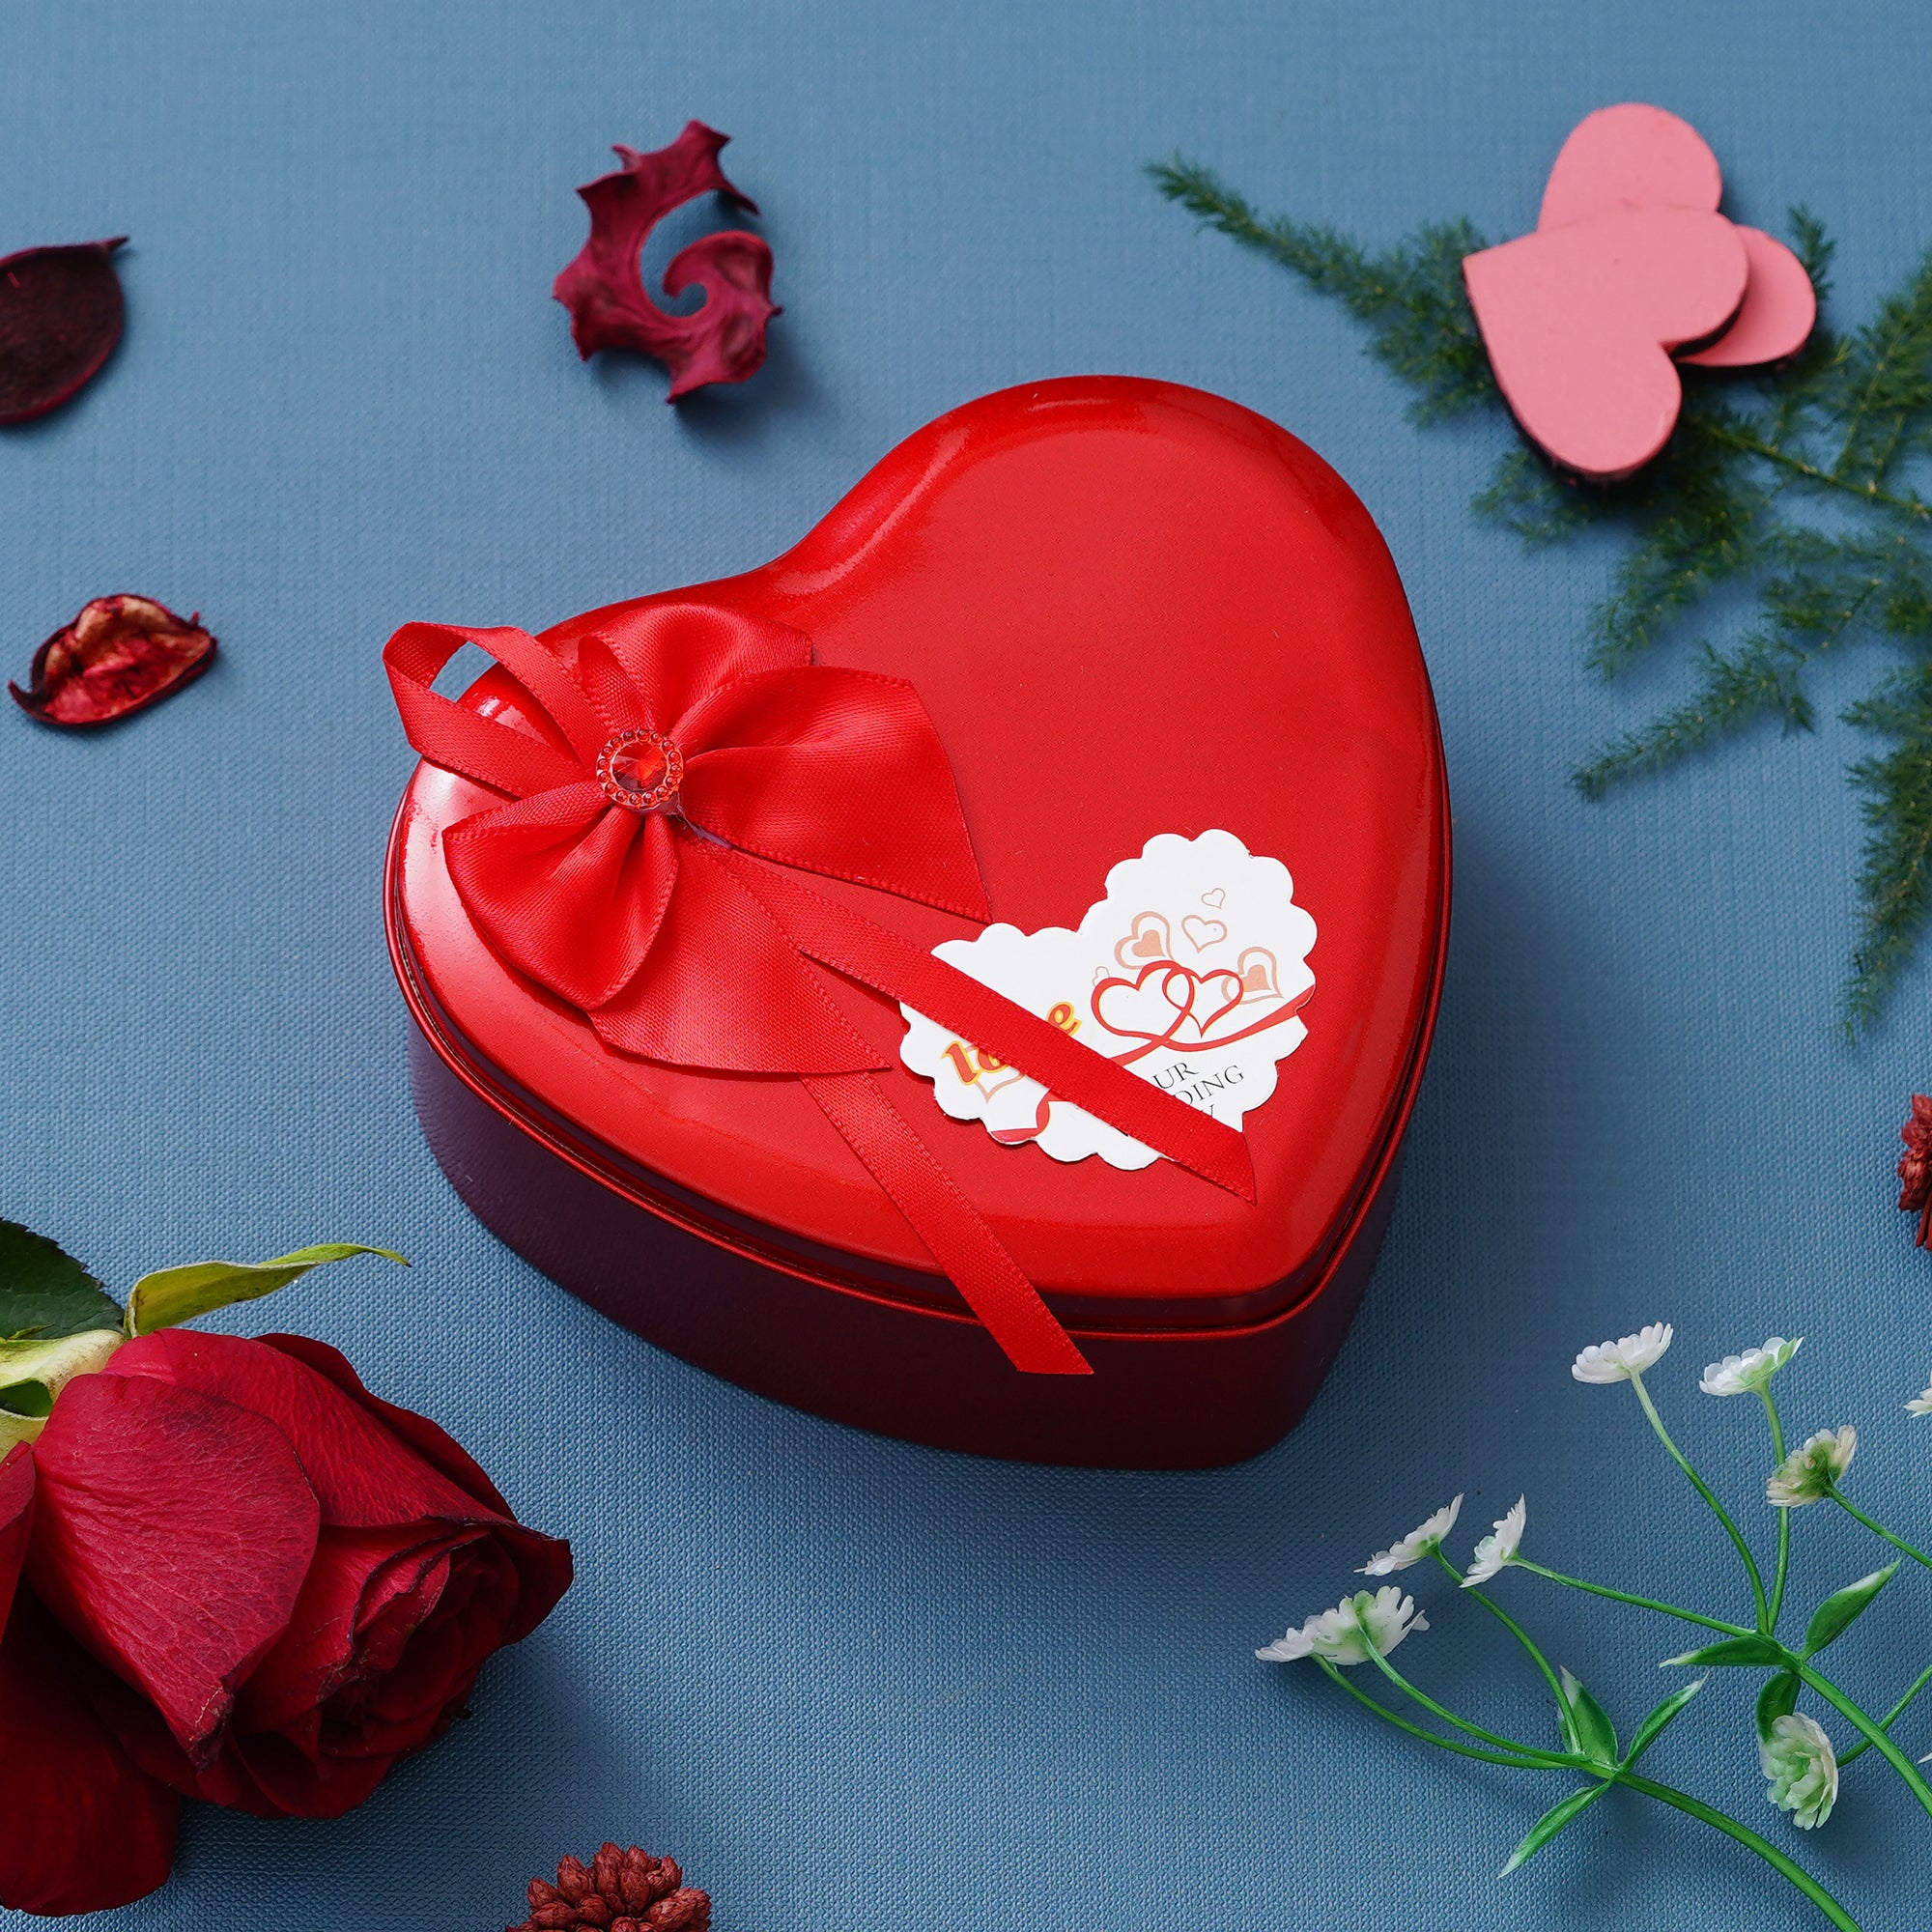 Red Roses and Teddy Bear Valentine's Heart Shaped Gift Box 2